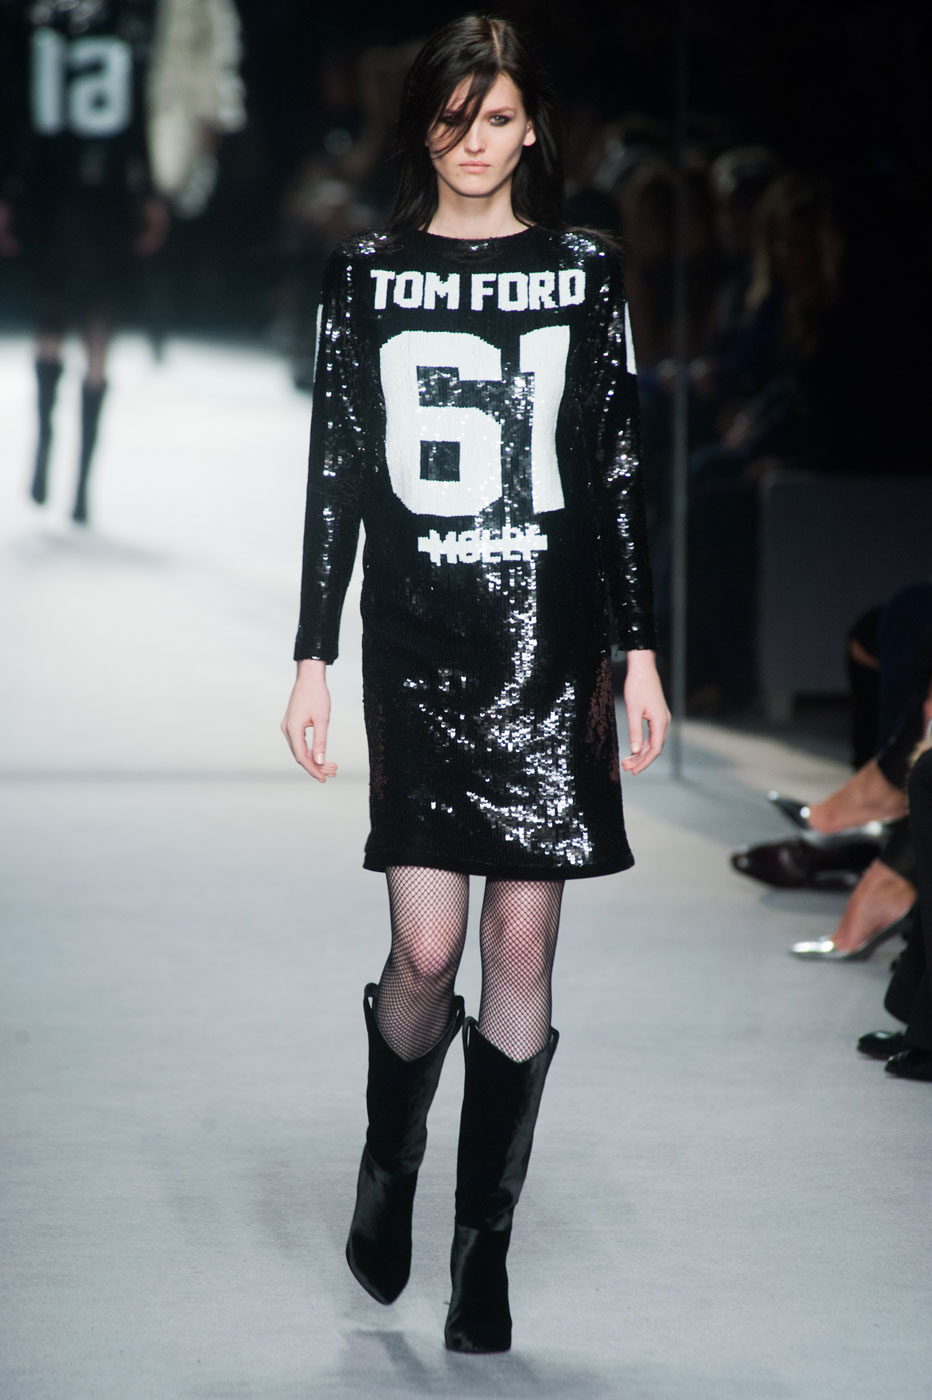 Top 10 Fashion Trends of Fall 2014 - theFashionSpot